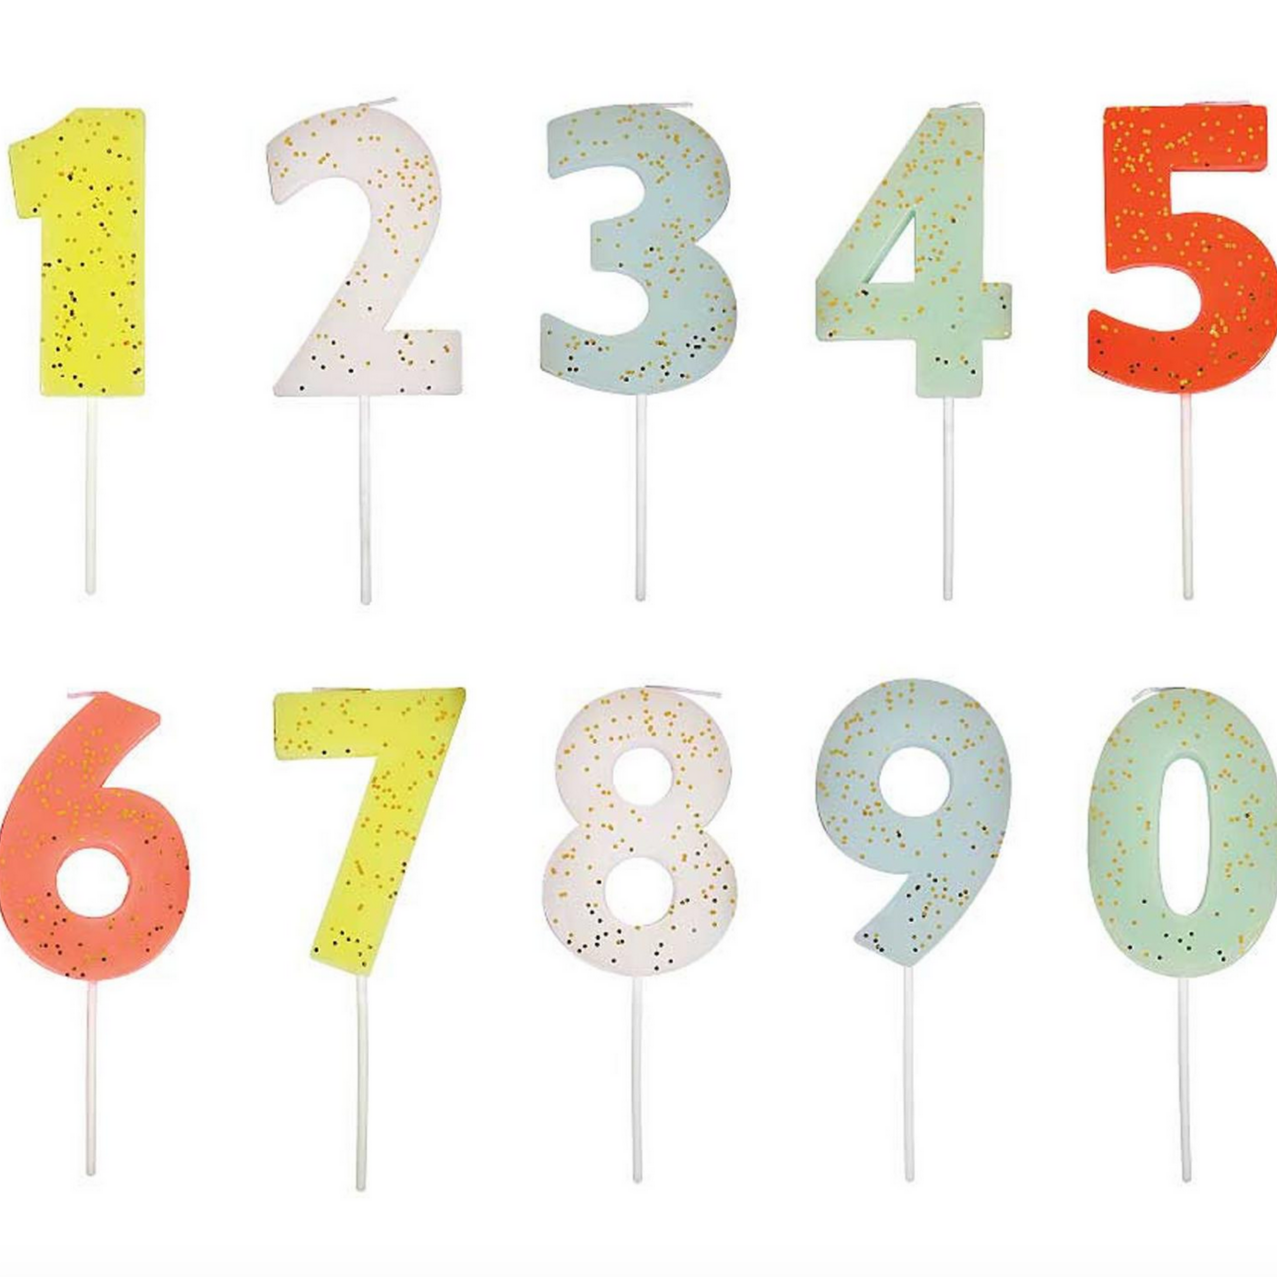 photo of number candles 0-9 all in a row